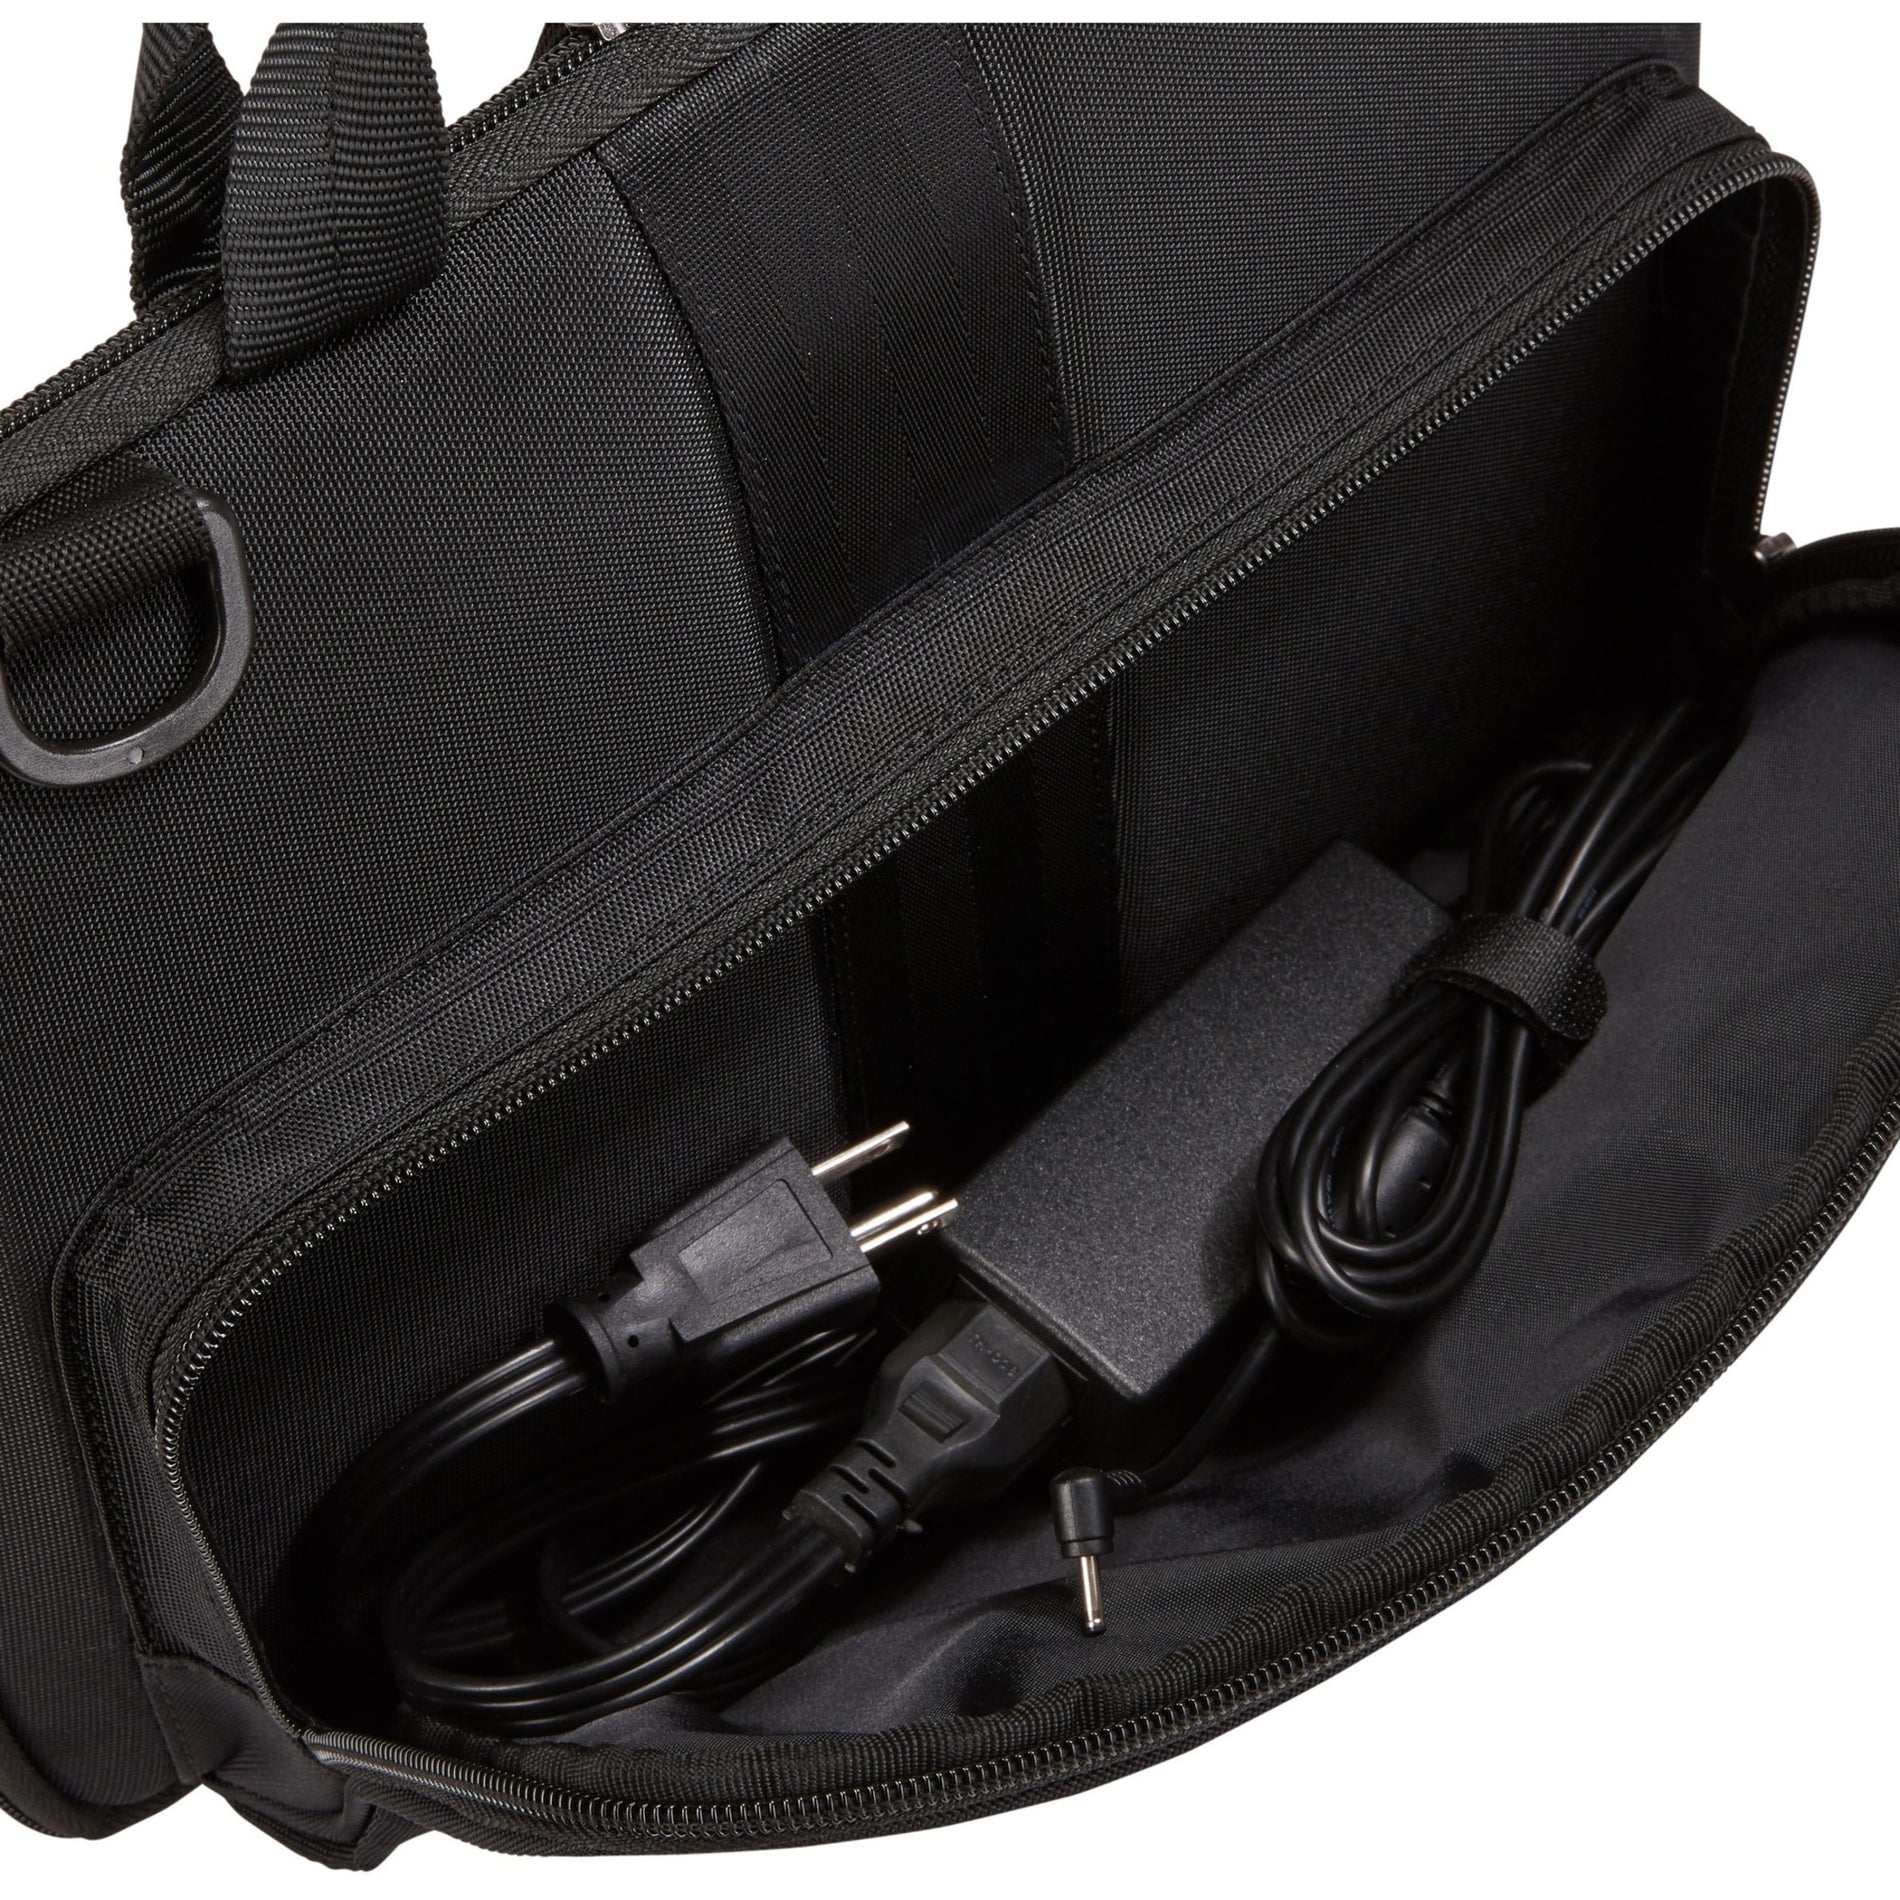 Case Logic 3203771 QNS-311 13.3" Laptop Attache, Carrying Case with Handle and Shoulder Strap, Black